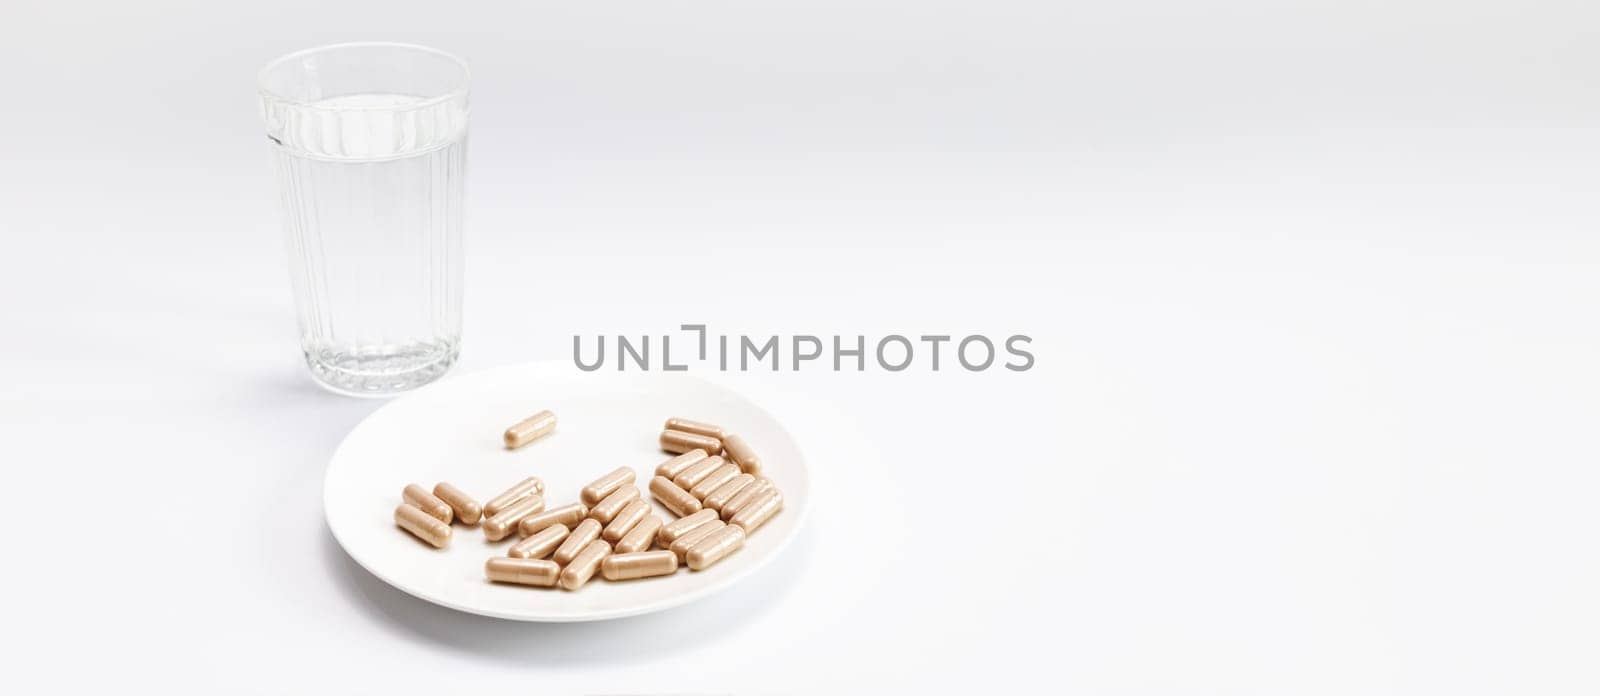 Banner Group Of Slippery Elm Capsules on plate, Glass Of Water On White Background. Traditional, dietary supplement. Holistic remedy, medication Horizontal Plane, Copy Space For Text.